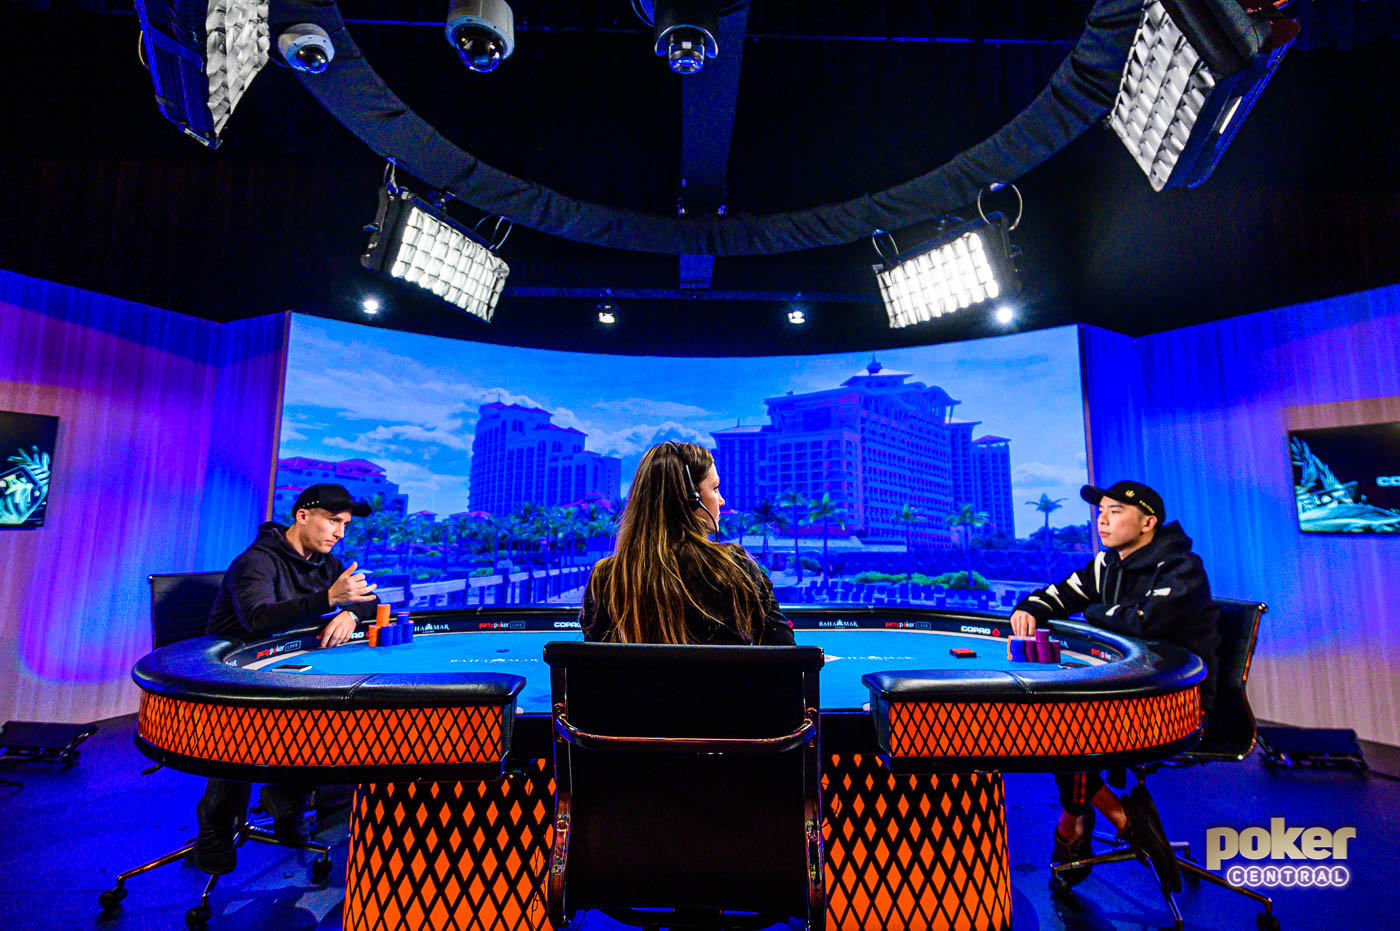 Wai Leong Chan and Daniel Dvoress heads up for the Super High Roller Bowl Bahamas Championship ring.